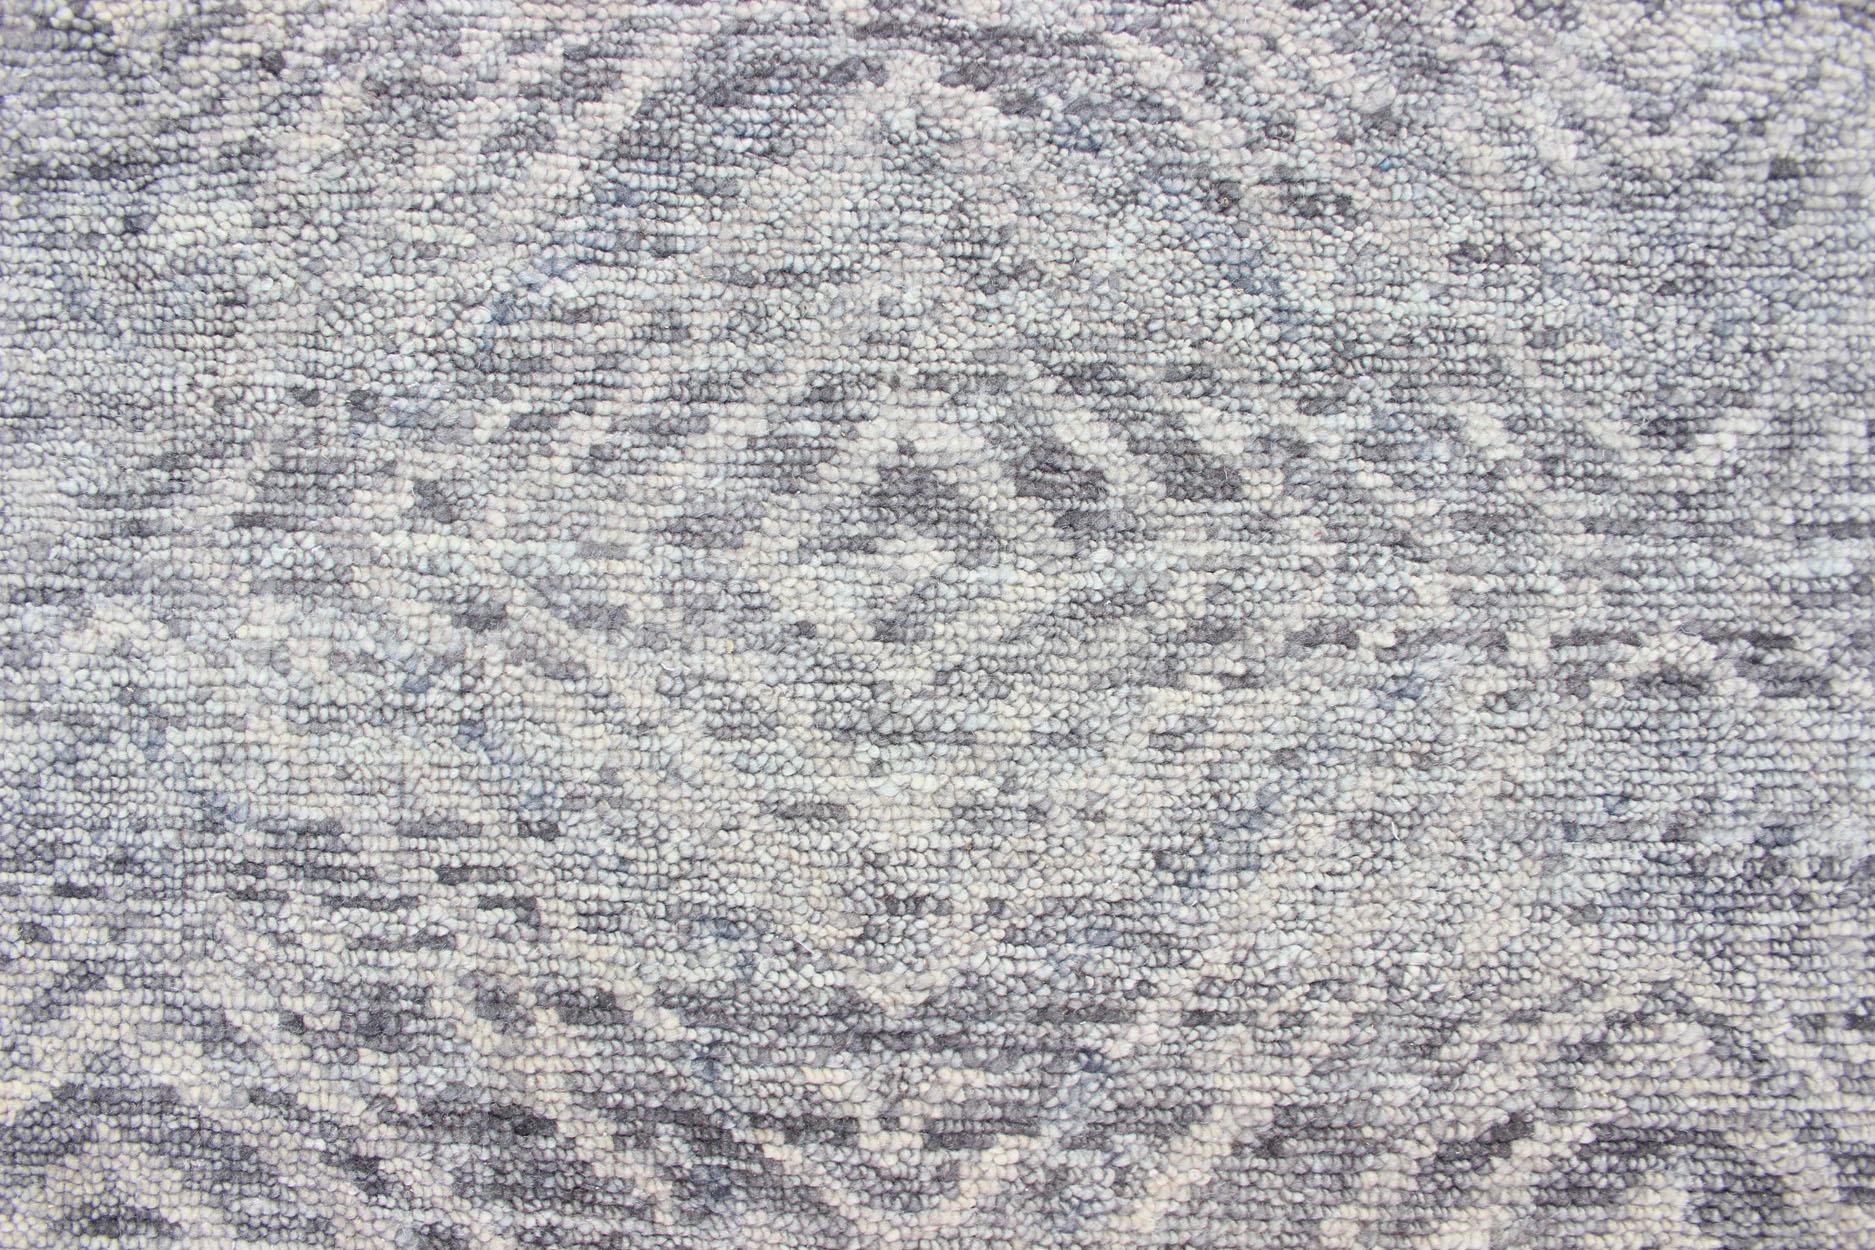 All-Over abstract Diamond Modern rug in Light gray, Green made with 100%wool pile  

Measures 9' x 12'
This abstract modern casual was hand-knotted in India during the 2010's. The background features a blend of gray, green, taupe, and cream to